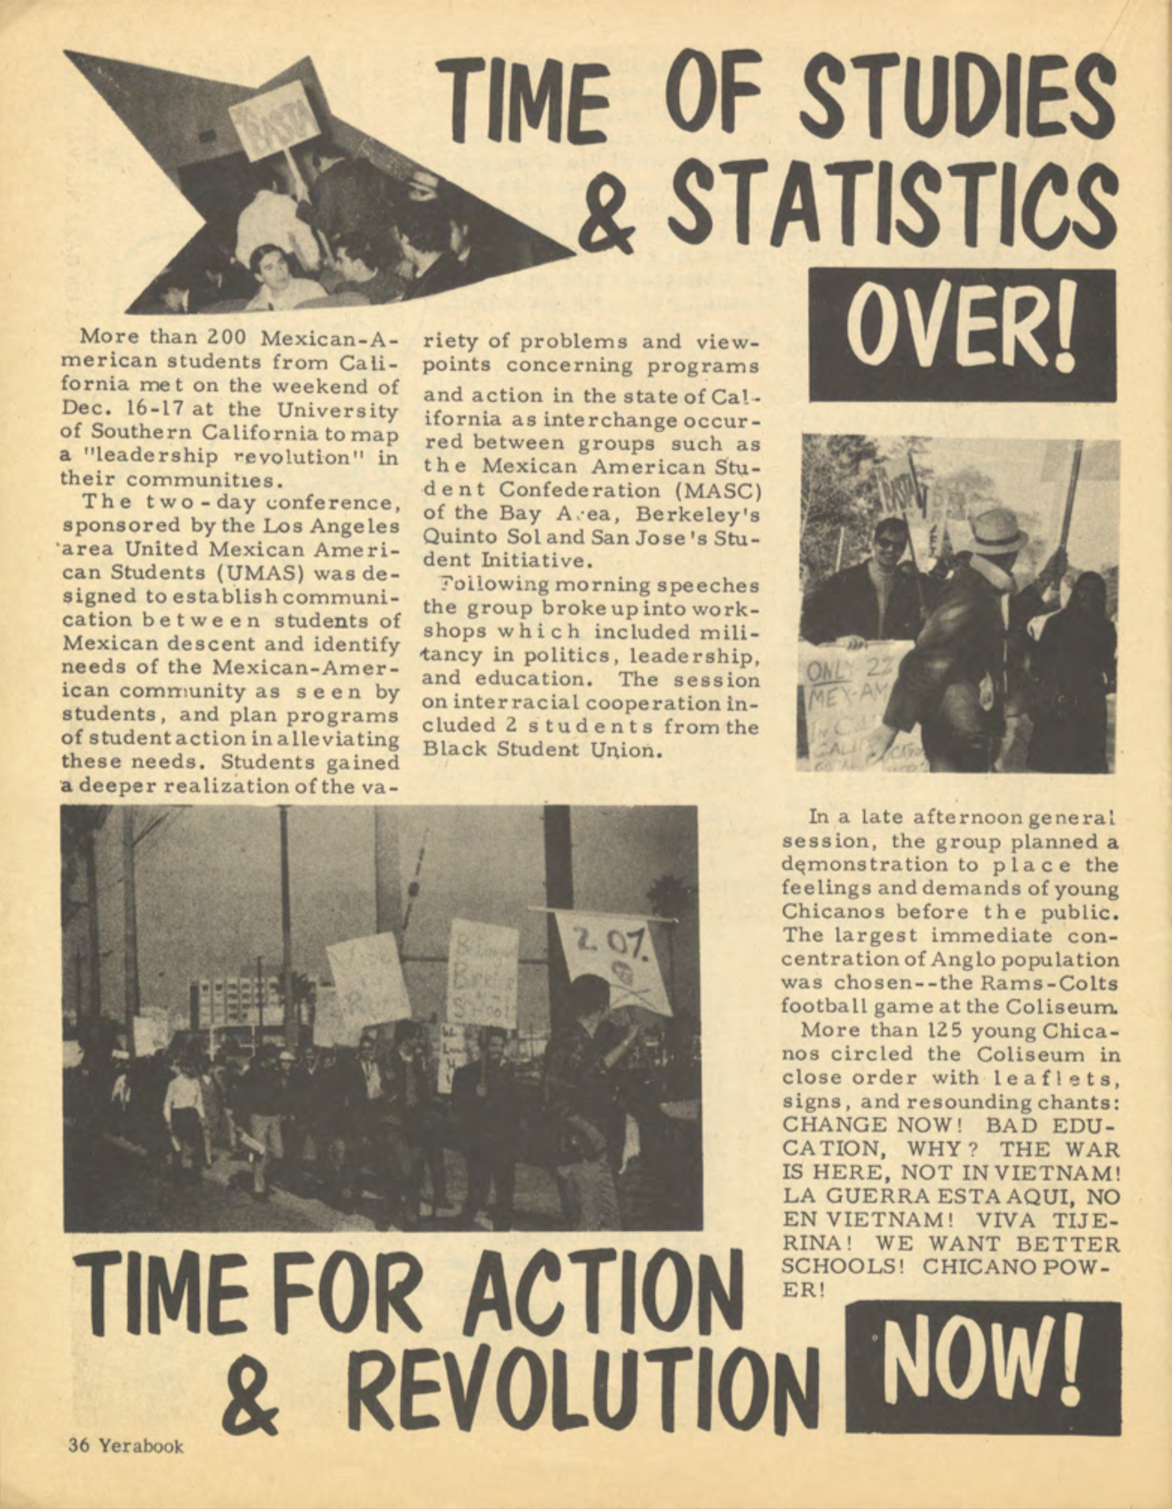 Page from La Raza Yearbook 1968. TIME OF STUDIES & STATISTICS OVER! TIME FOR ACTION & REVOLUTION NOW!